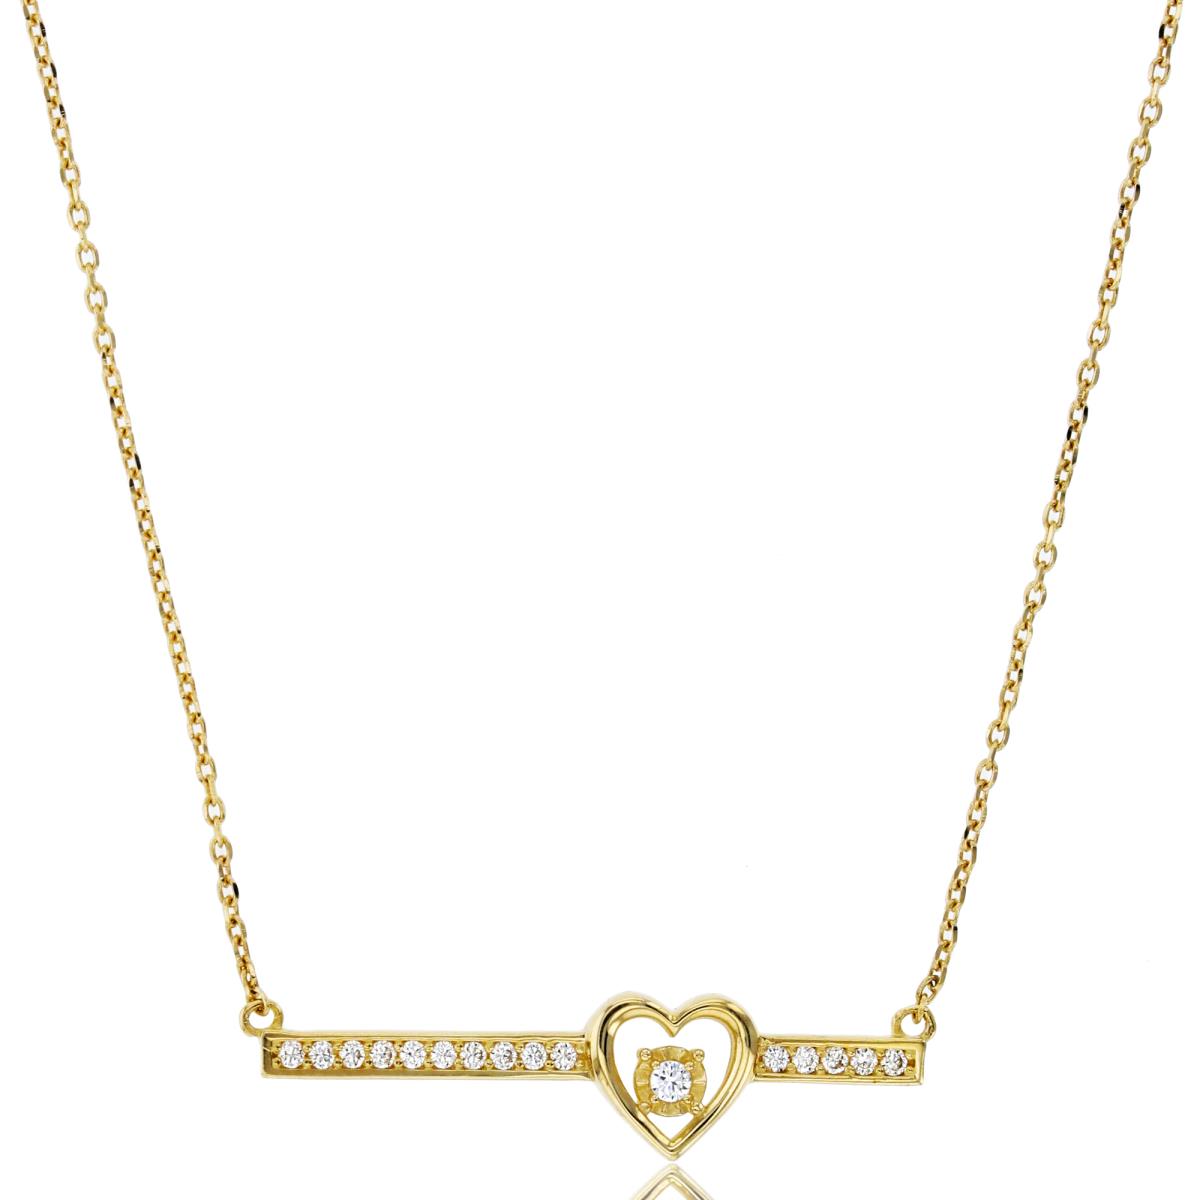 10K Yellow Gold Rnd CZ Heart on Bar 16"+2"Necklace